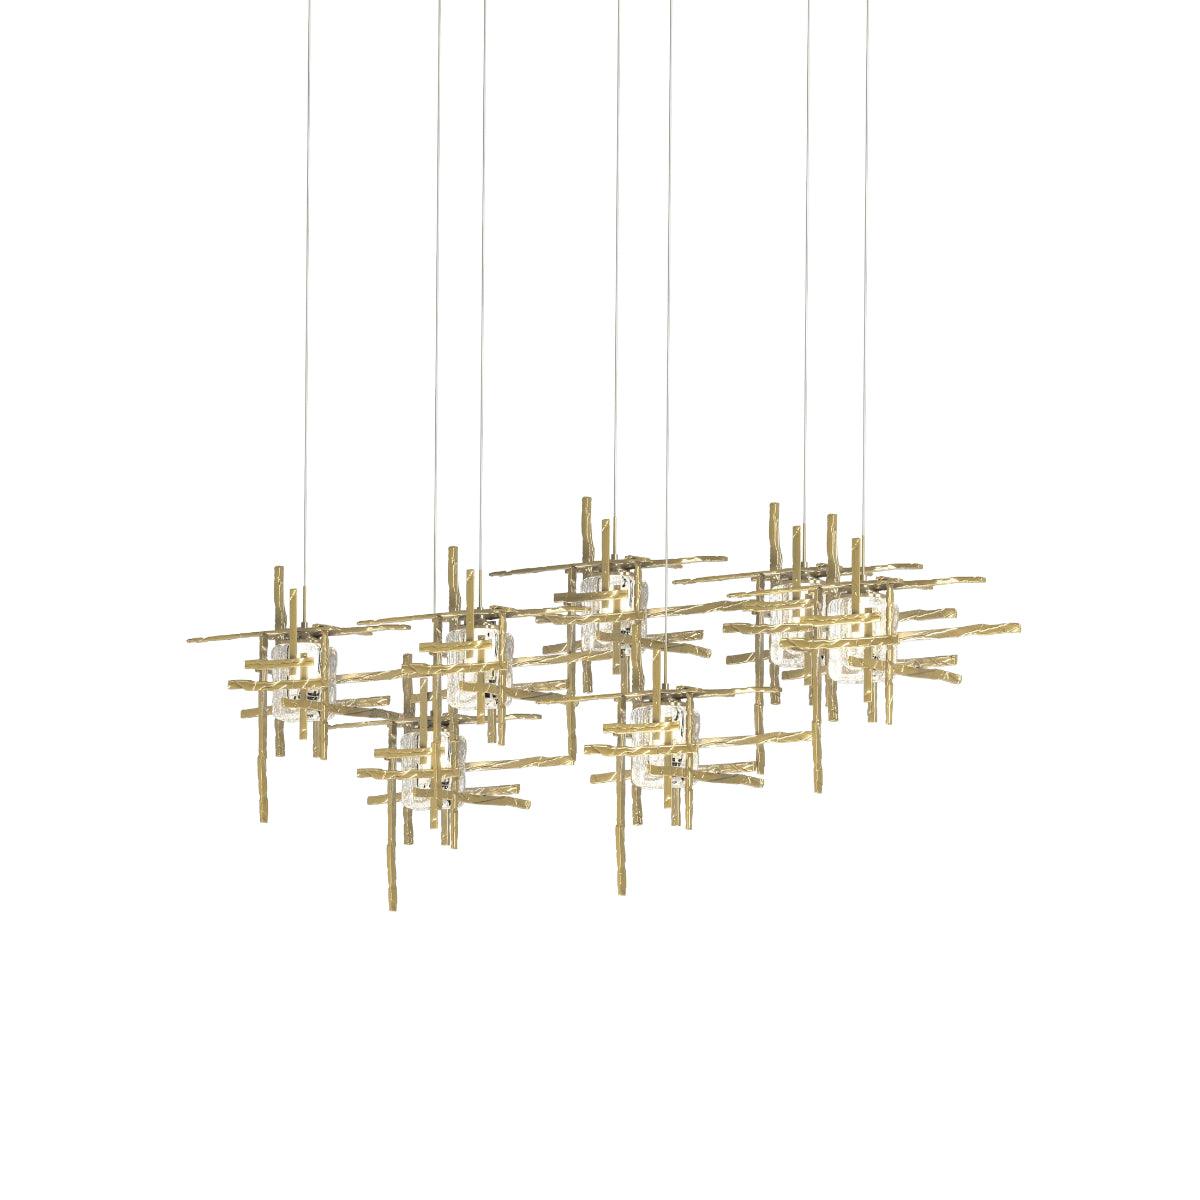 Tura 54 in. 7 Lights Linear Pendant Light with Long Height Seeded Glass